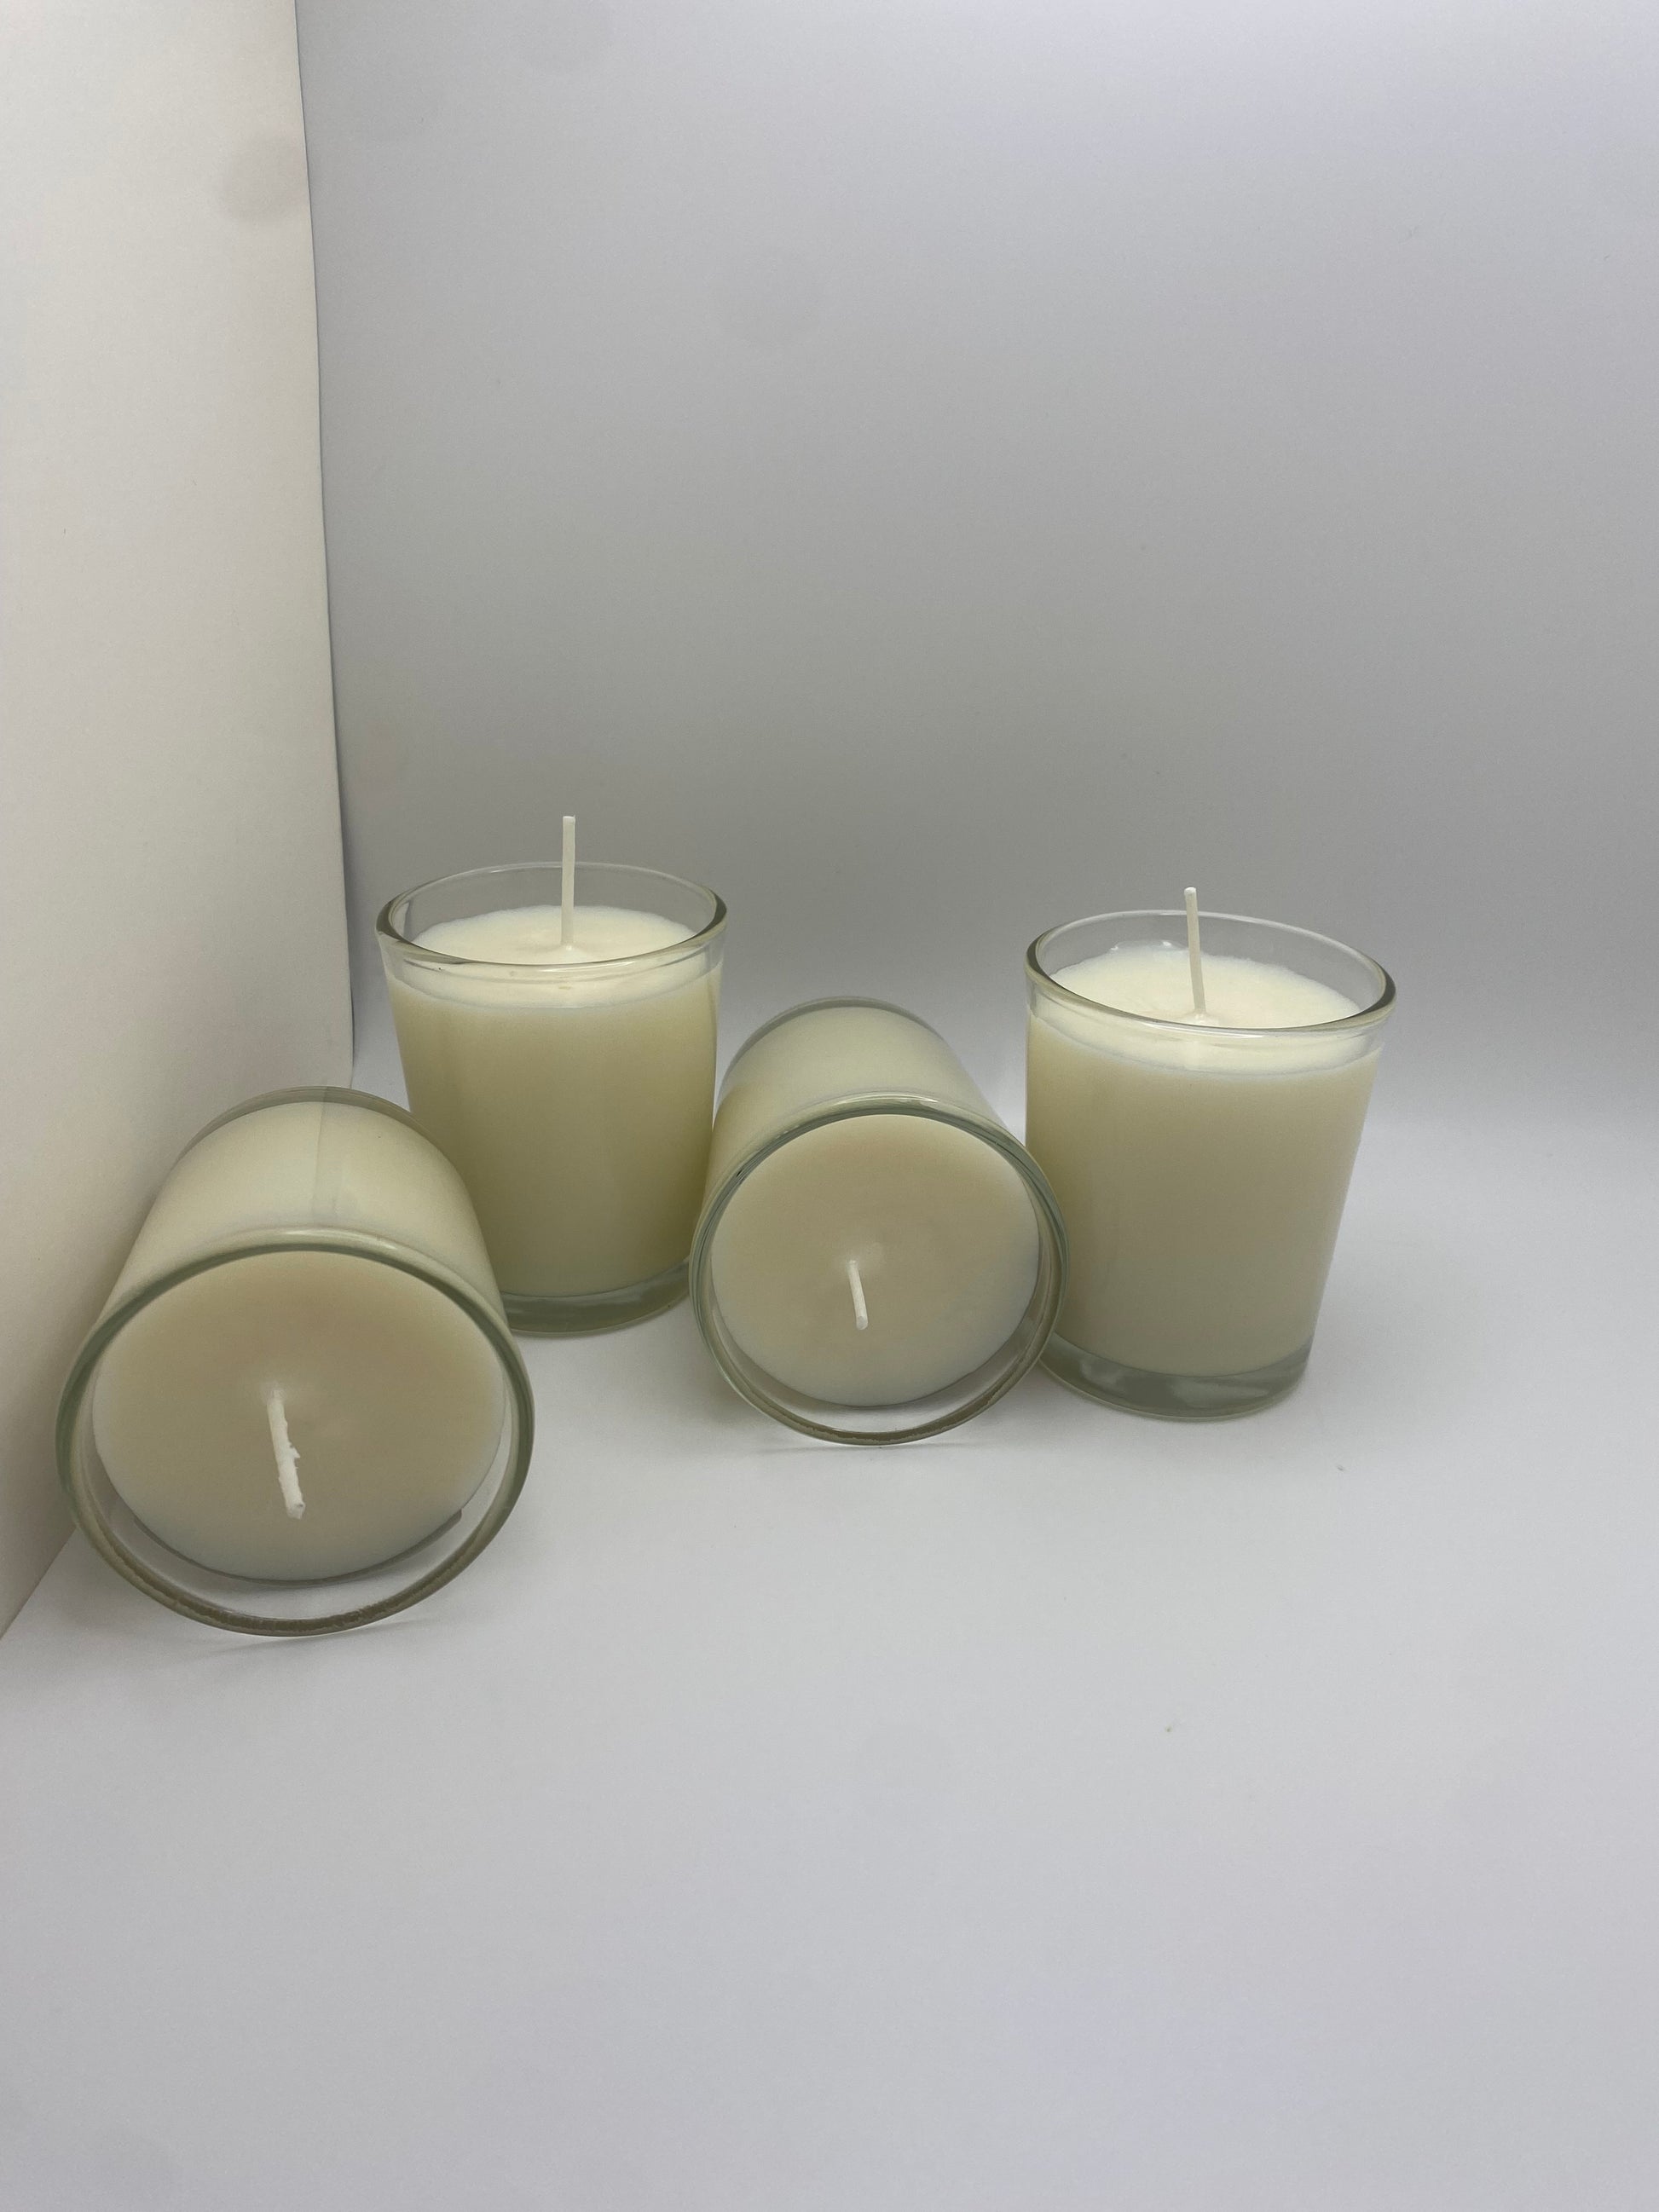 4 votive candle jars with white wax